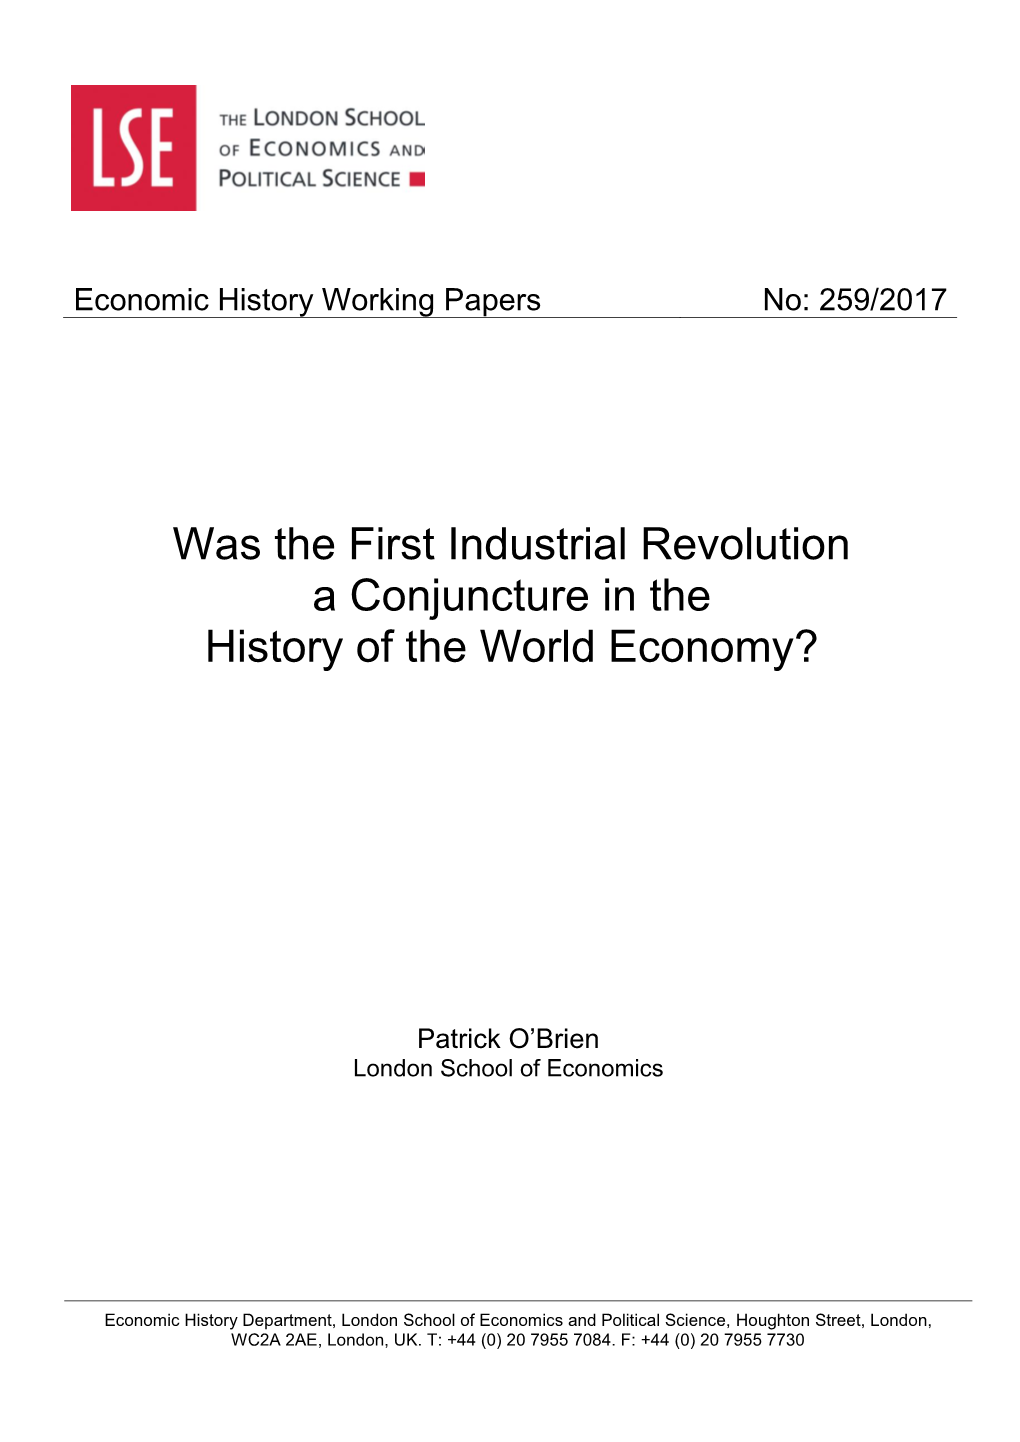 Was the First Industrial Revolution a Conjuncture in the History of the World Economy?*